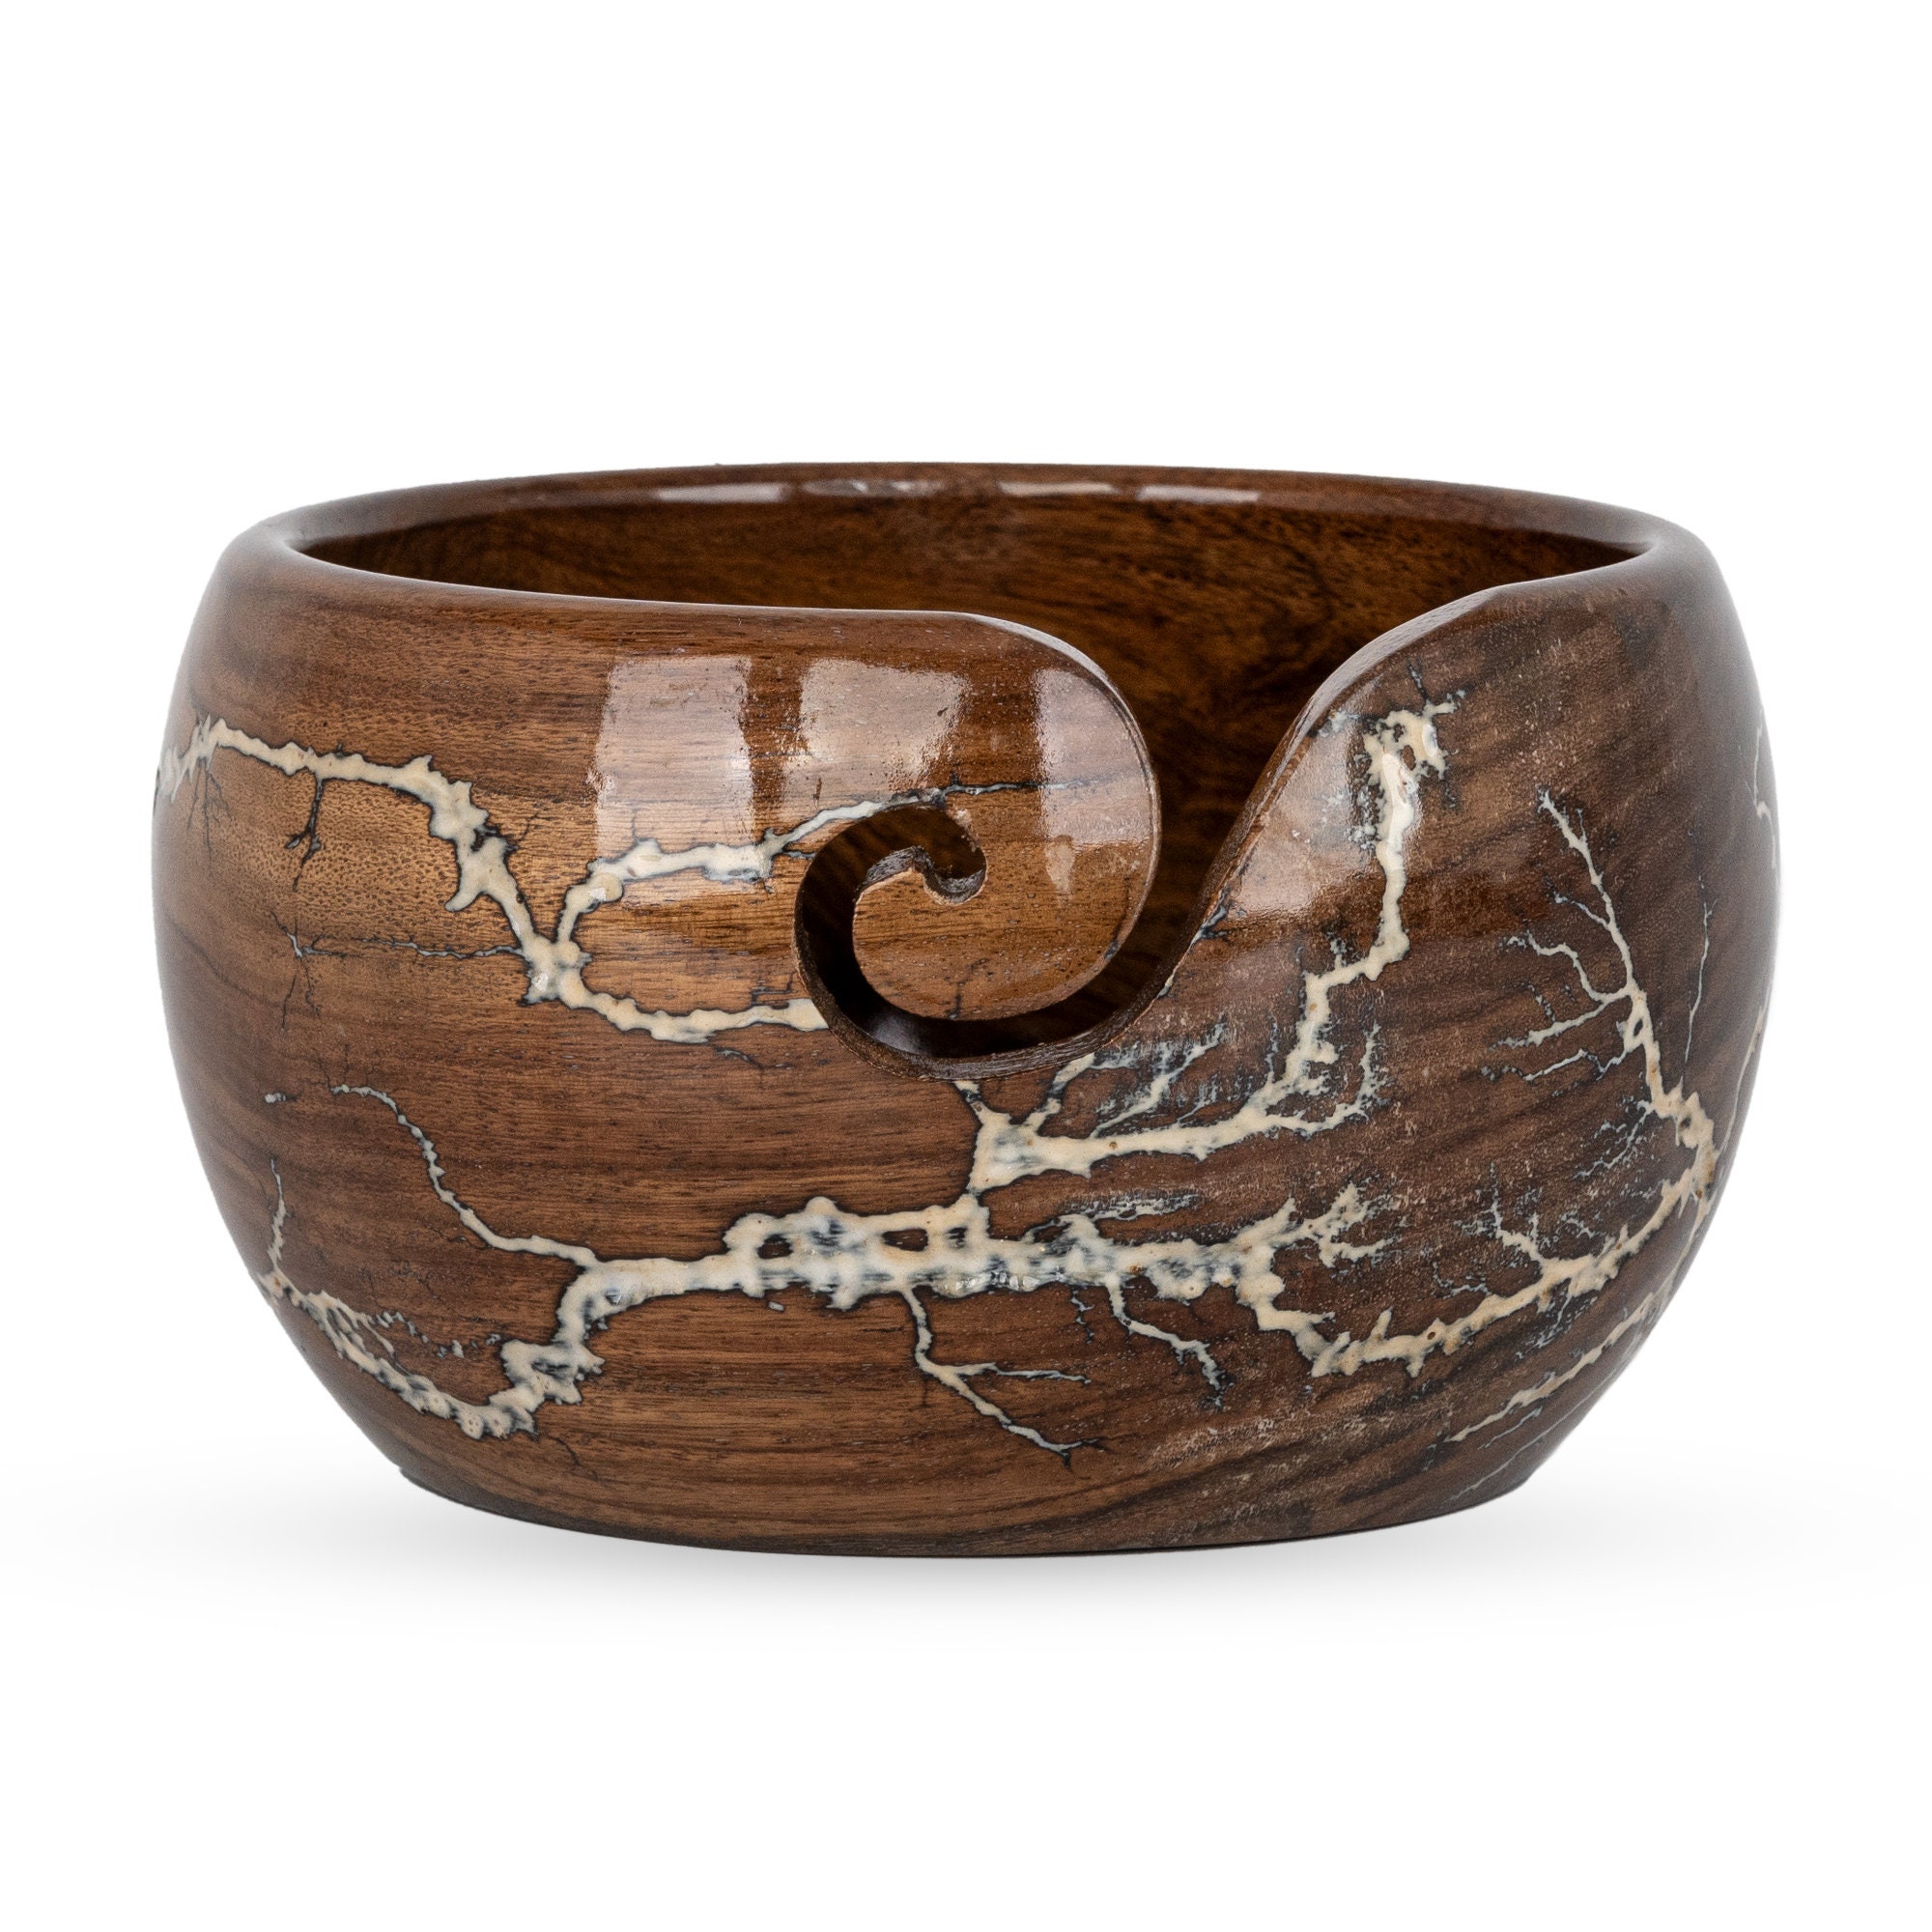  Samhita Acacia Wood Wooden Yarn Bowl for Crocheting & Knitting  Hand Made by Indian Artisans Birthday Gifts for Mom & Knitting Lovers (6 x  6 x 3) : Arts, Crafts 